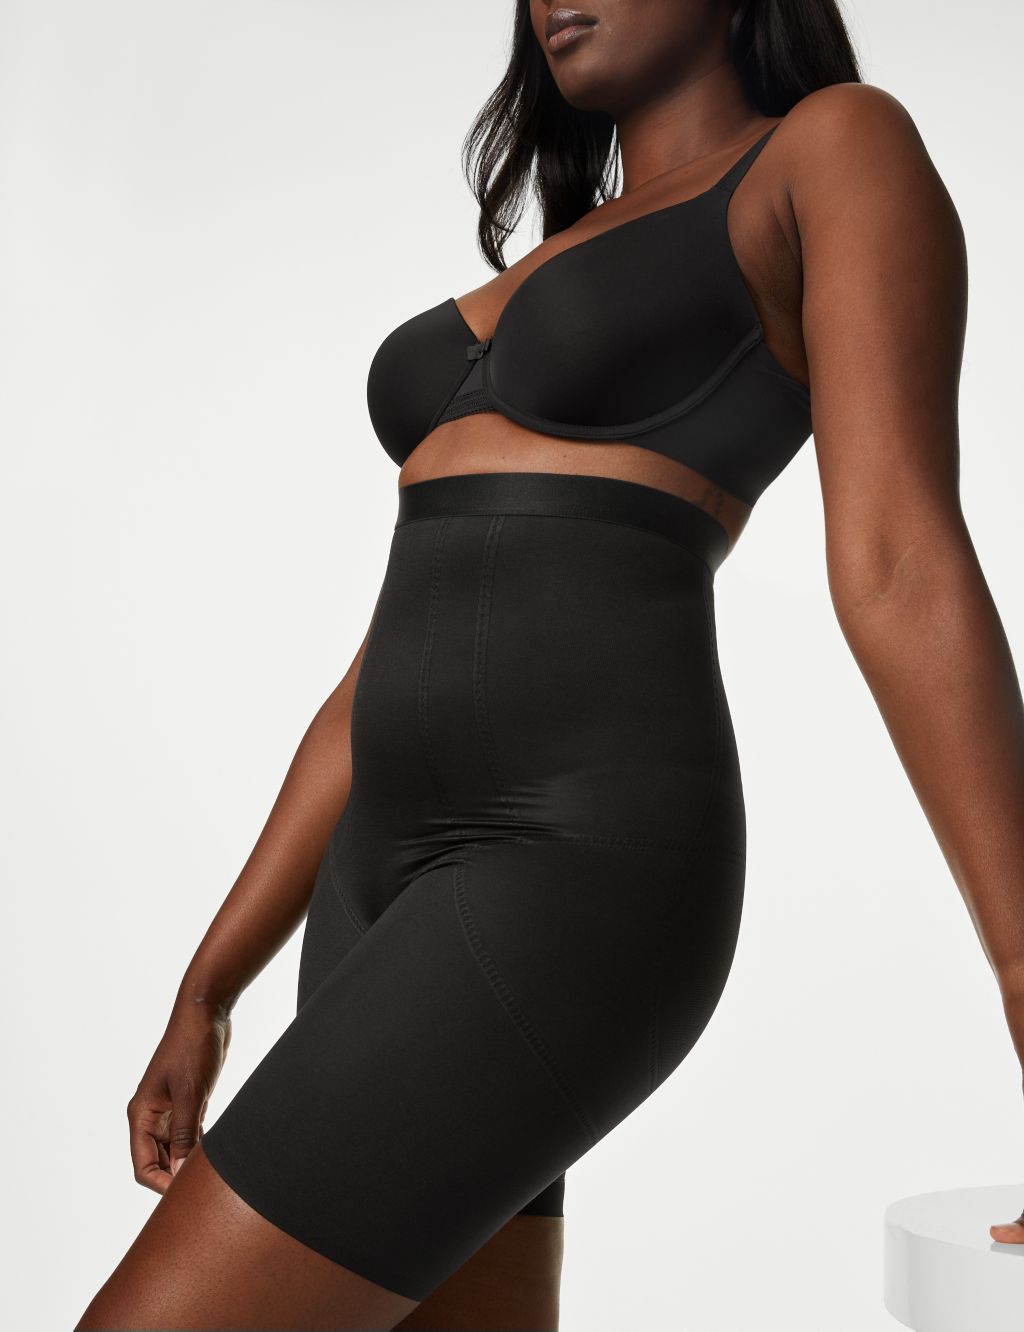 Shoppers are rushing to M&S to snap up £25 shapewear that 'hides